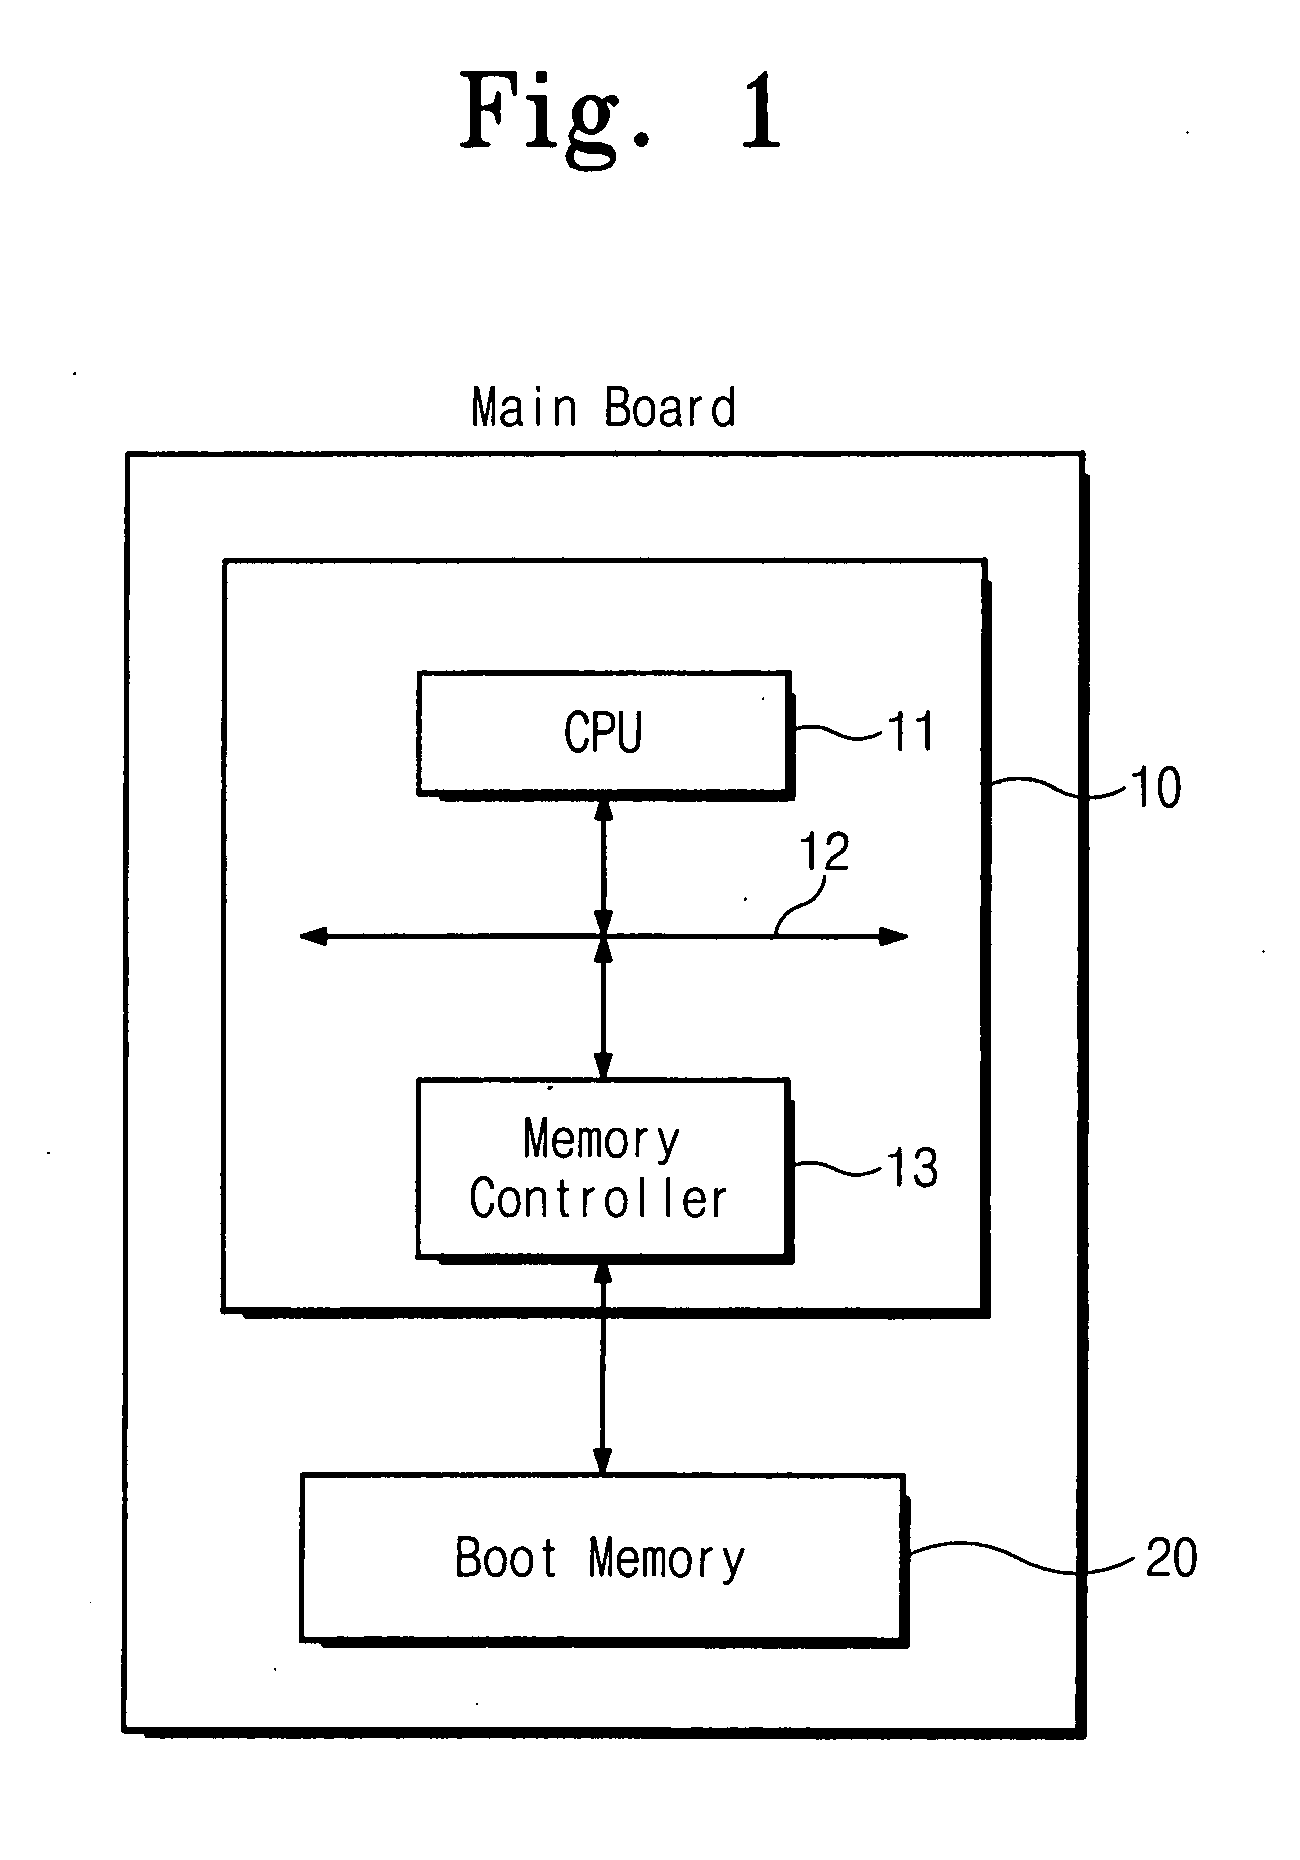 System comprising electronic device and external device storing boot code for booting system